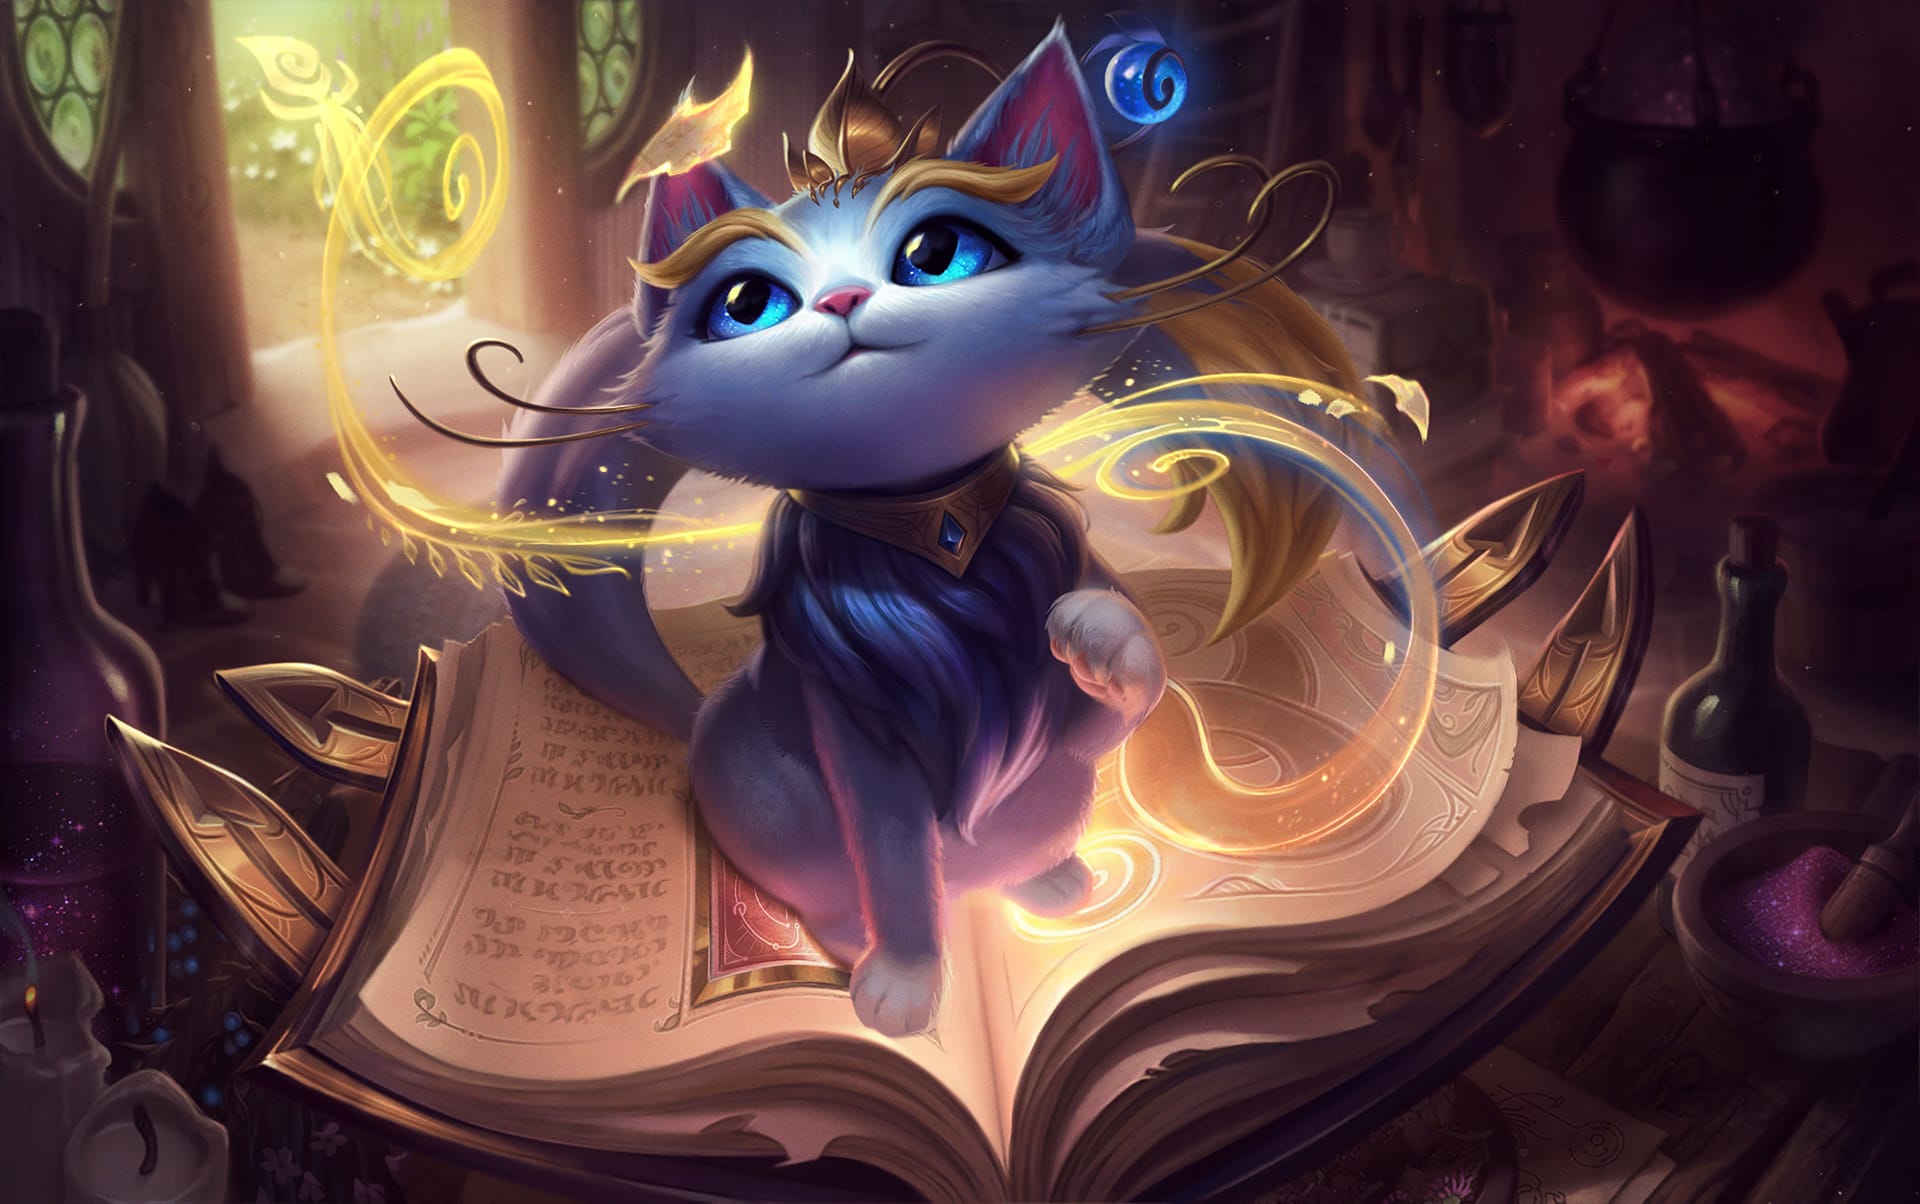 Pick a champion in League of Legends that brings you joy like Yuumi the cat